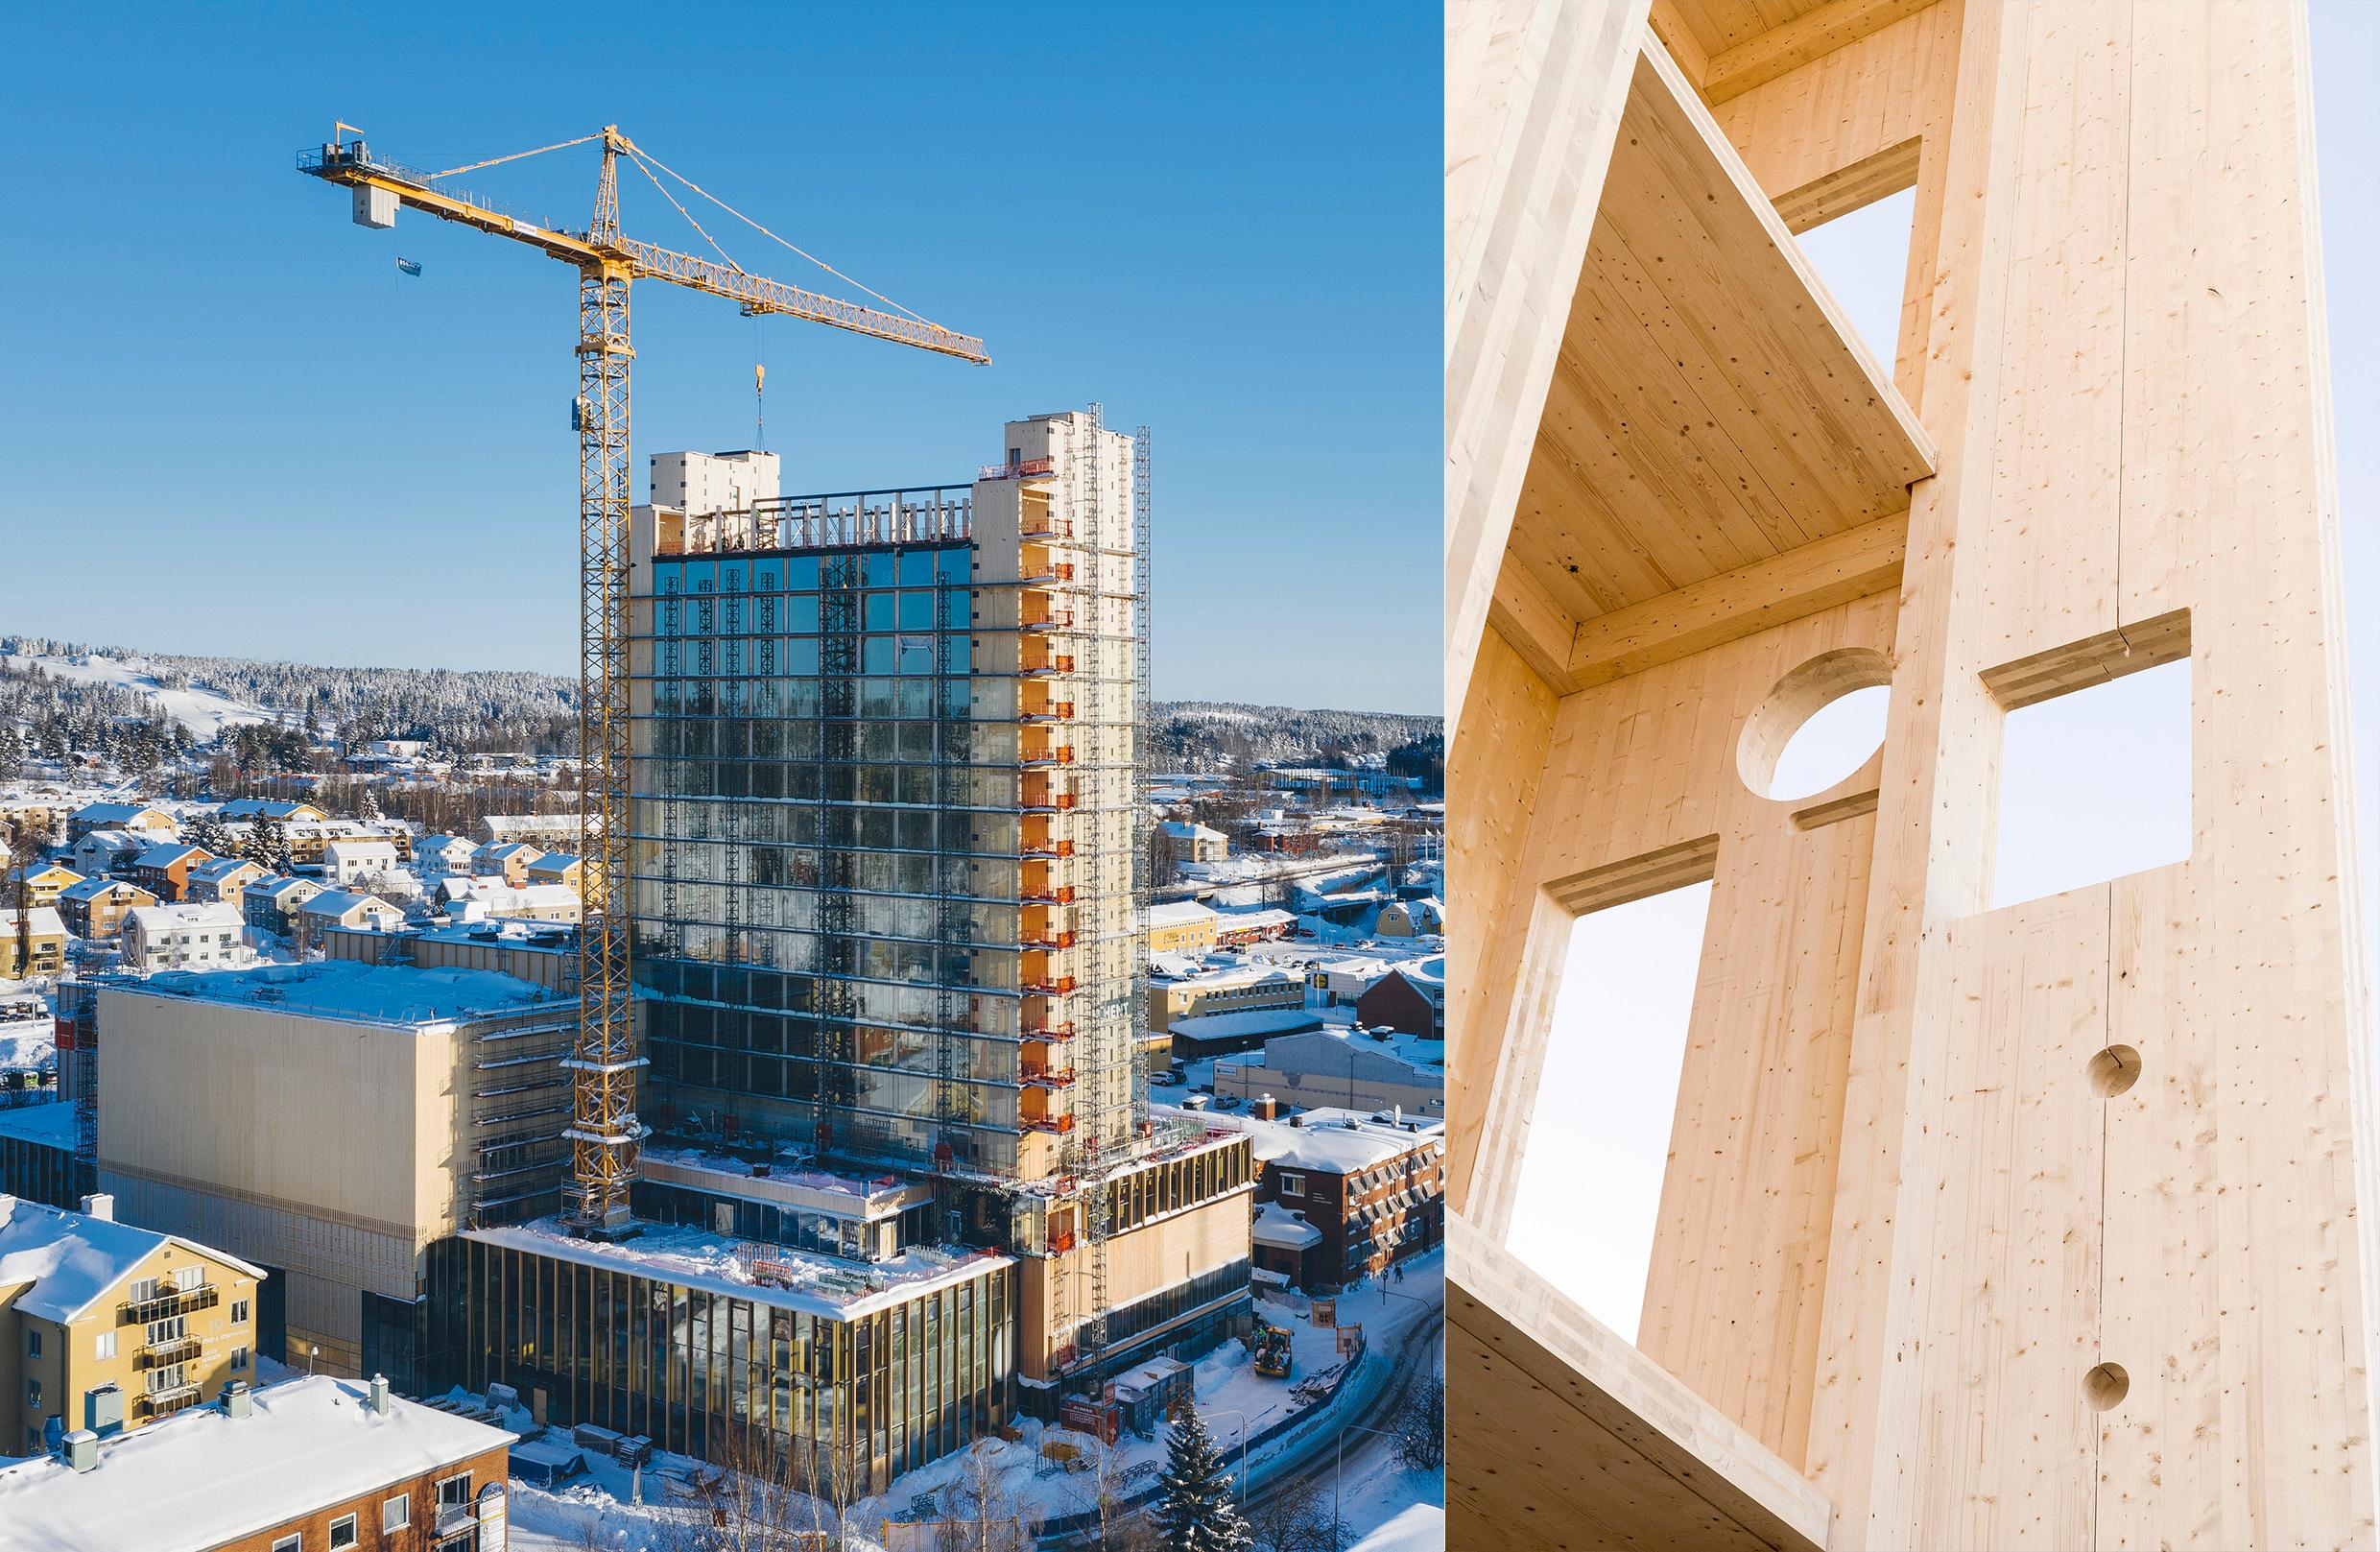 Sara Cultural Centre under construction. One photo with a towering building and a crane, one close-up of wooden walls. Building in wood is one way towards a greener future.